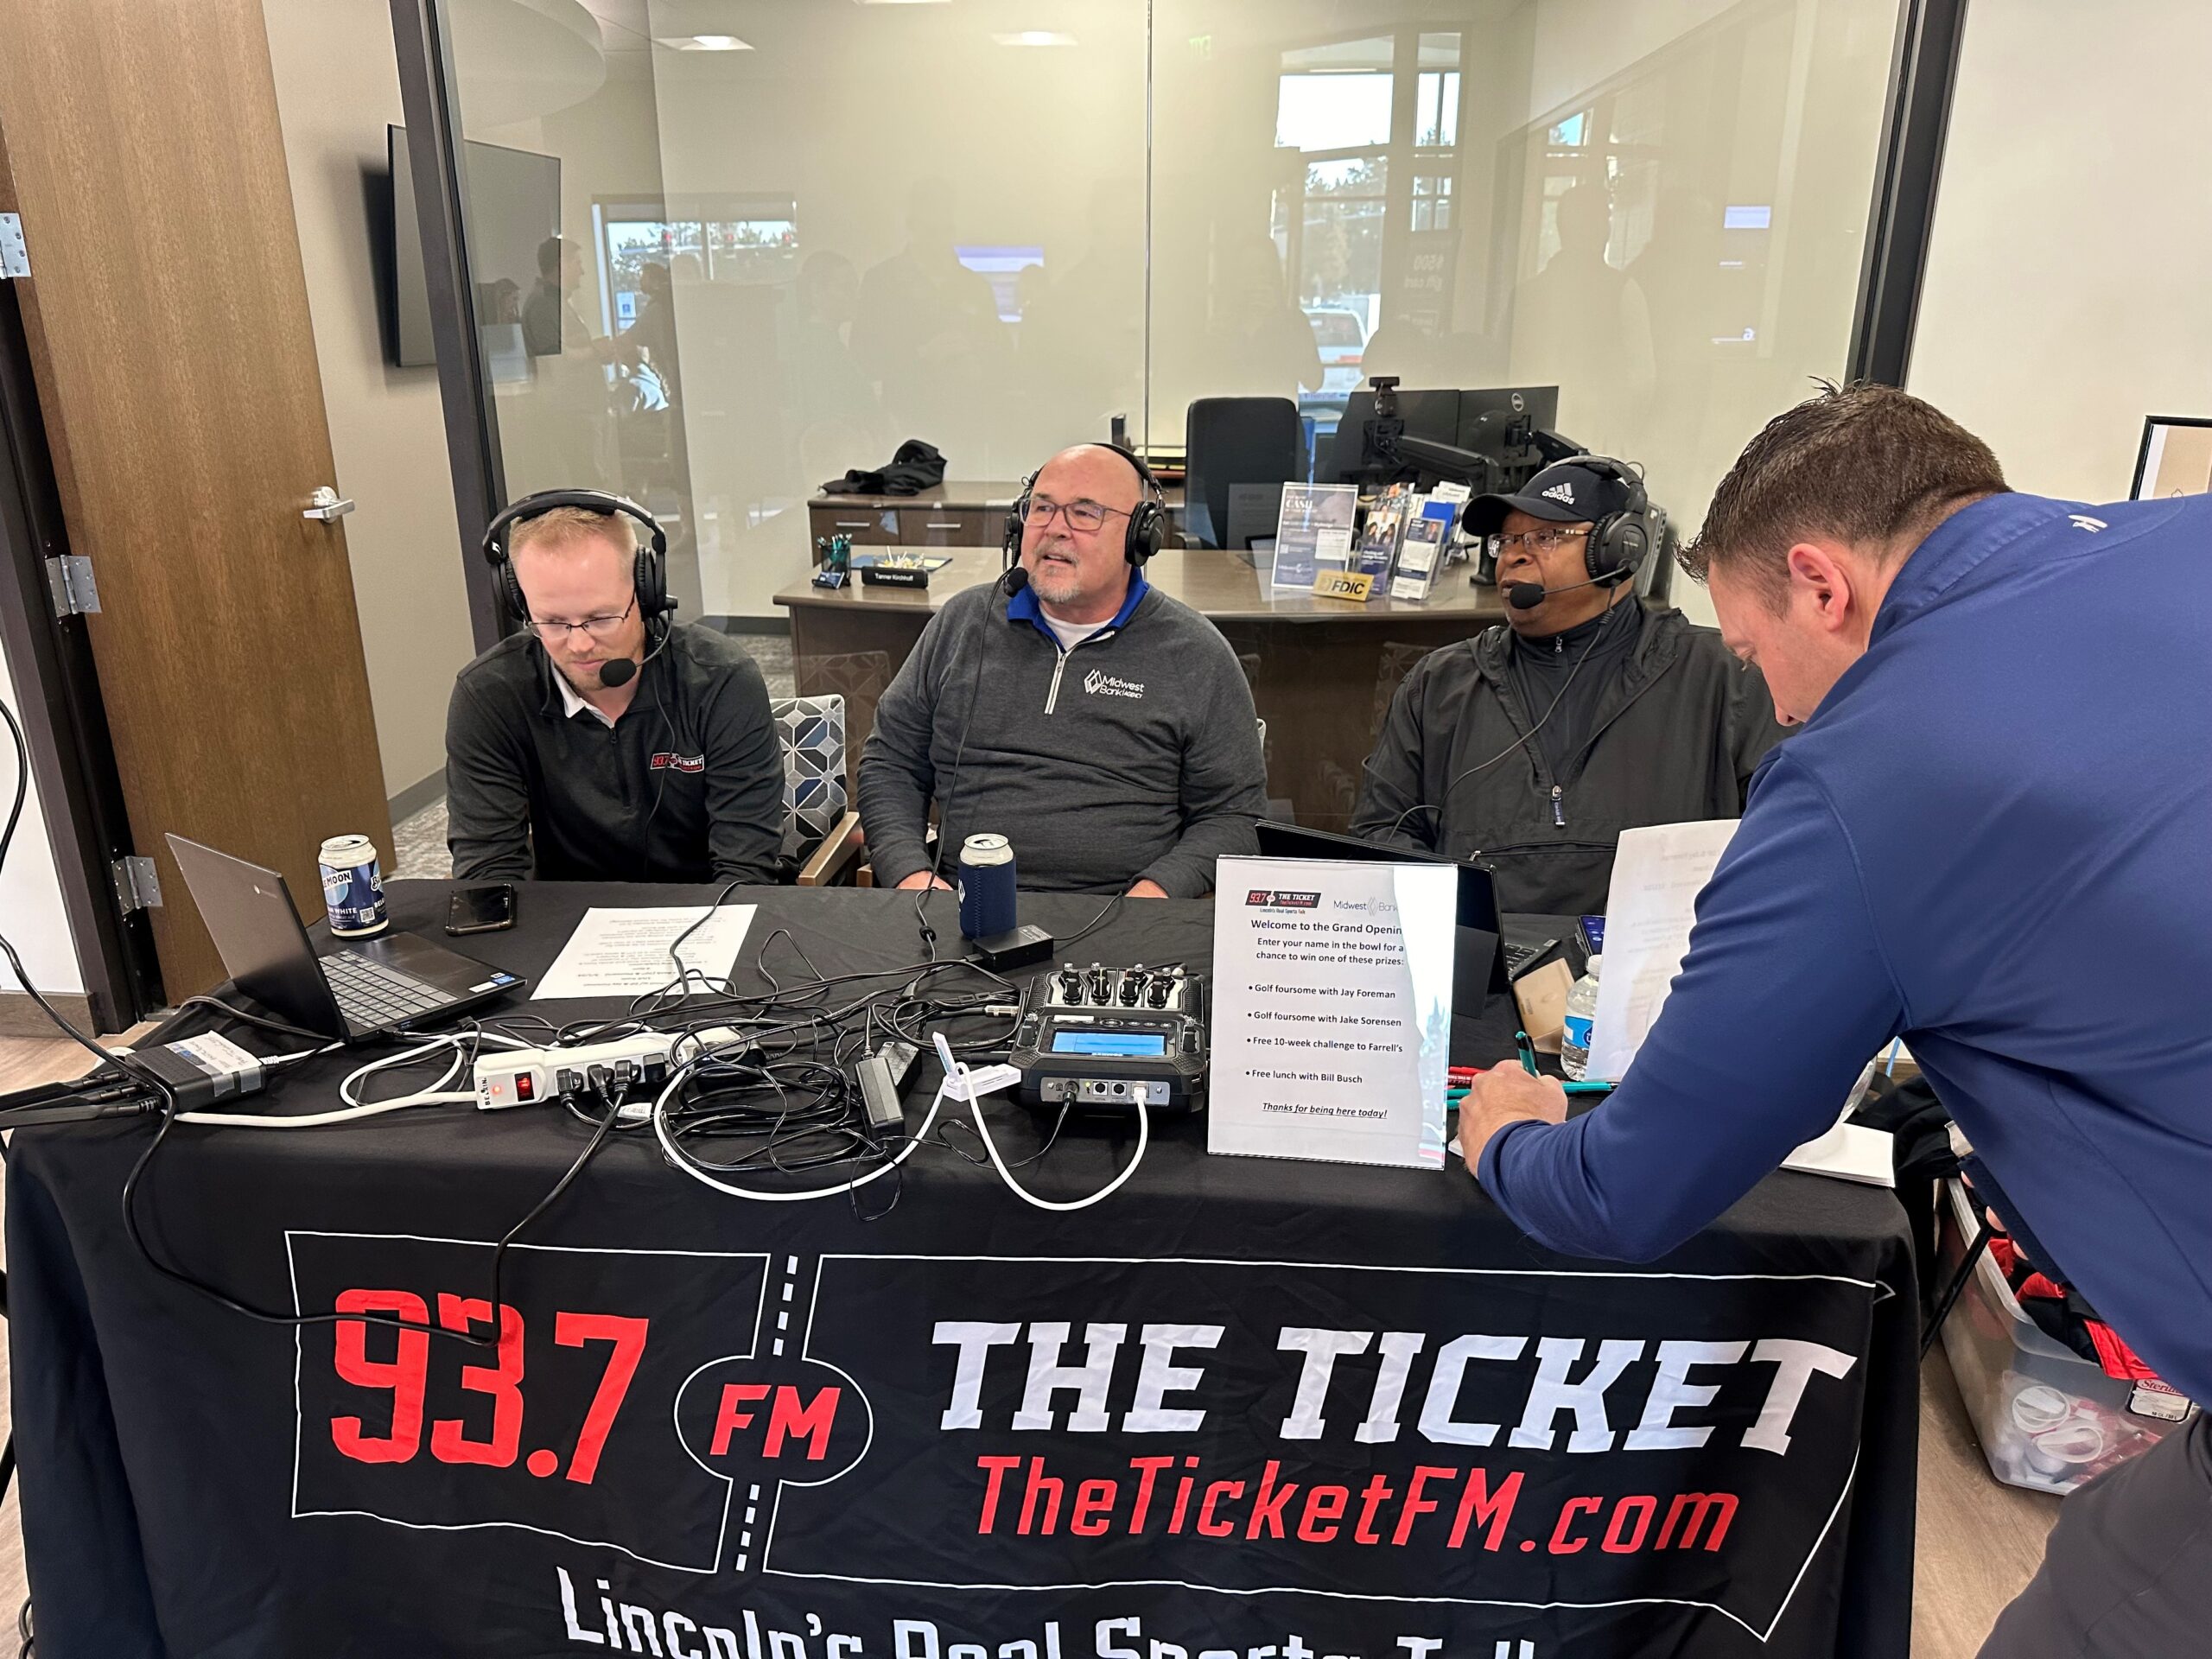 93.7 The Ticket live remote show at the Lincoln Pioneer grand opening.